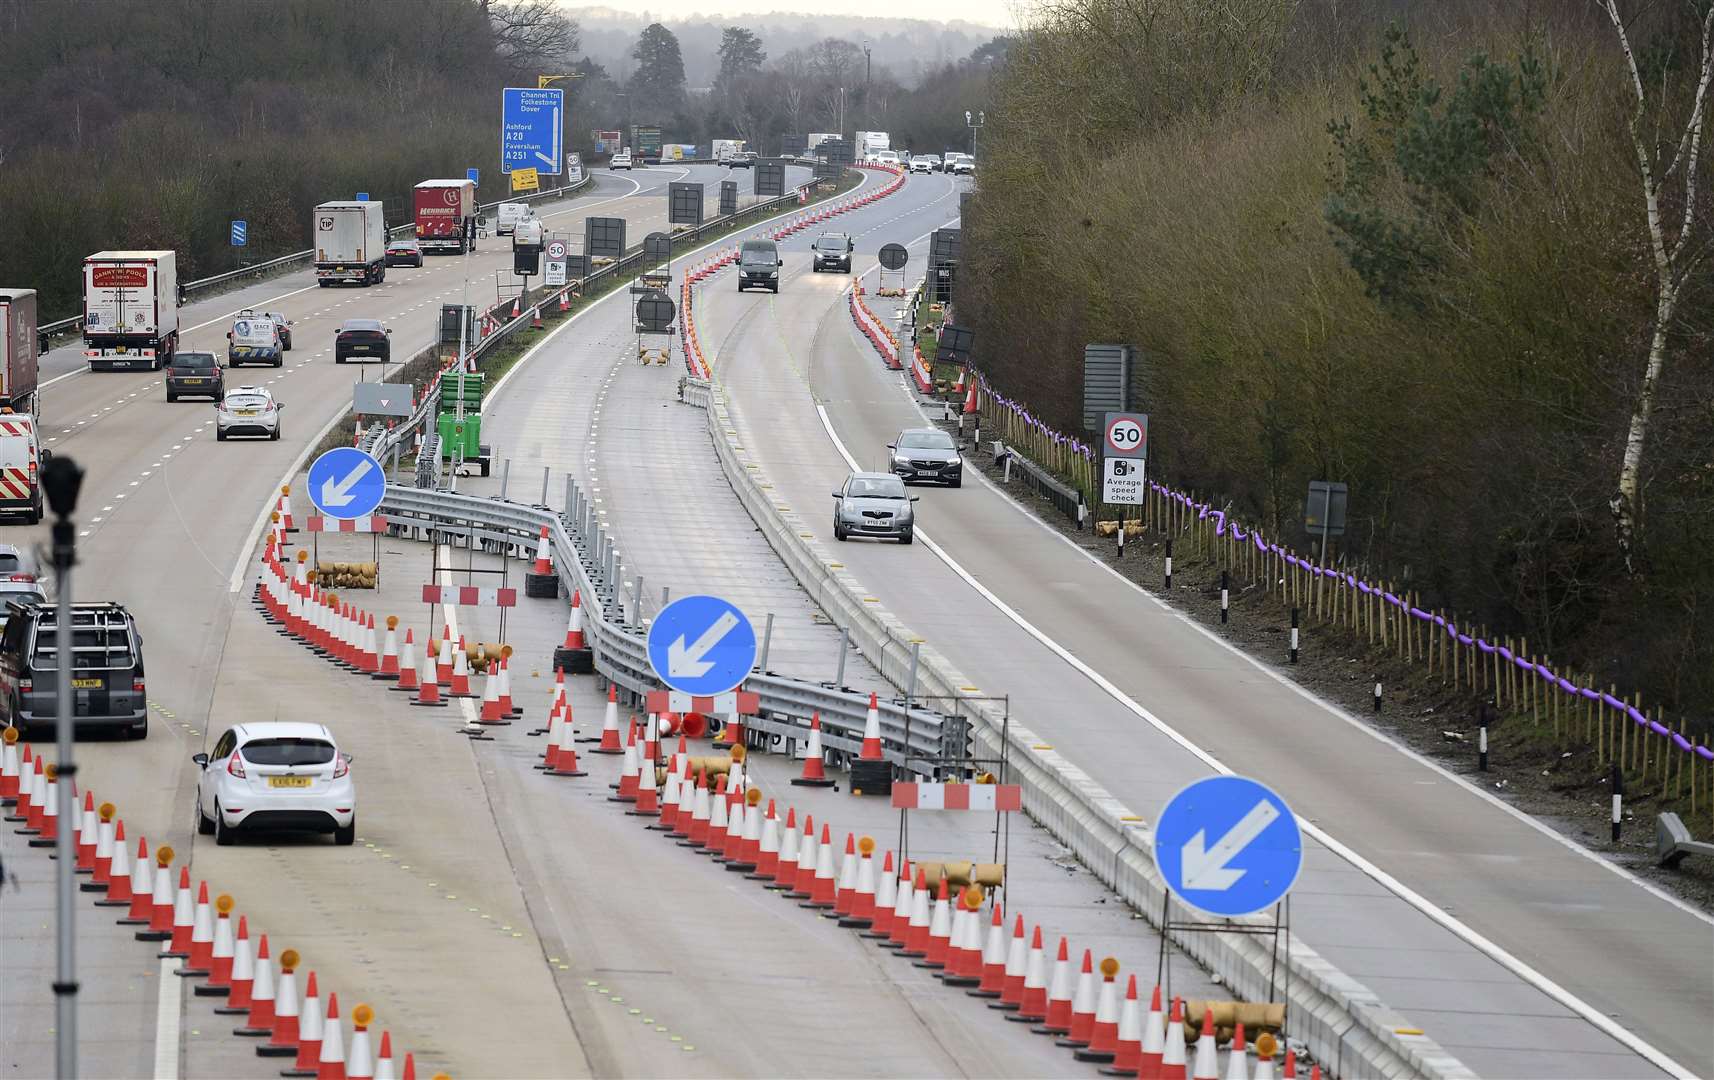 The contraflow system returned over the weekend, meaning drivers are now facing narrows lanes and a 50mph limit. Picture: Barry Goodwin